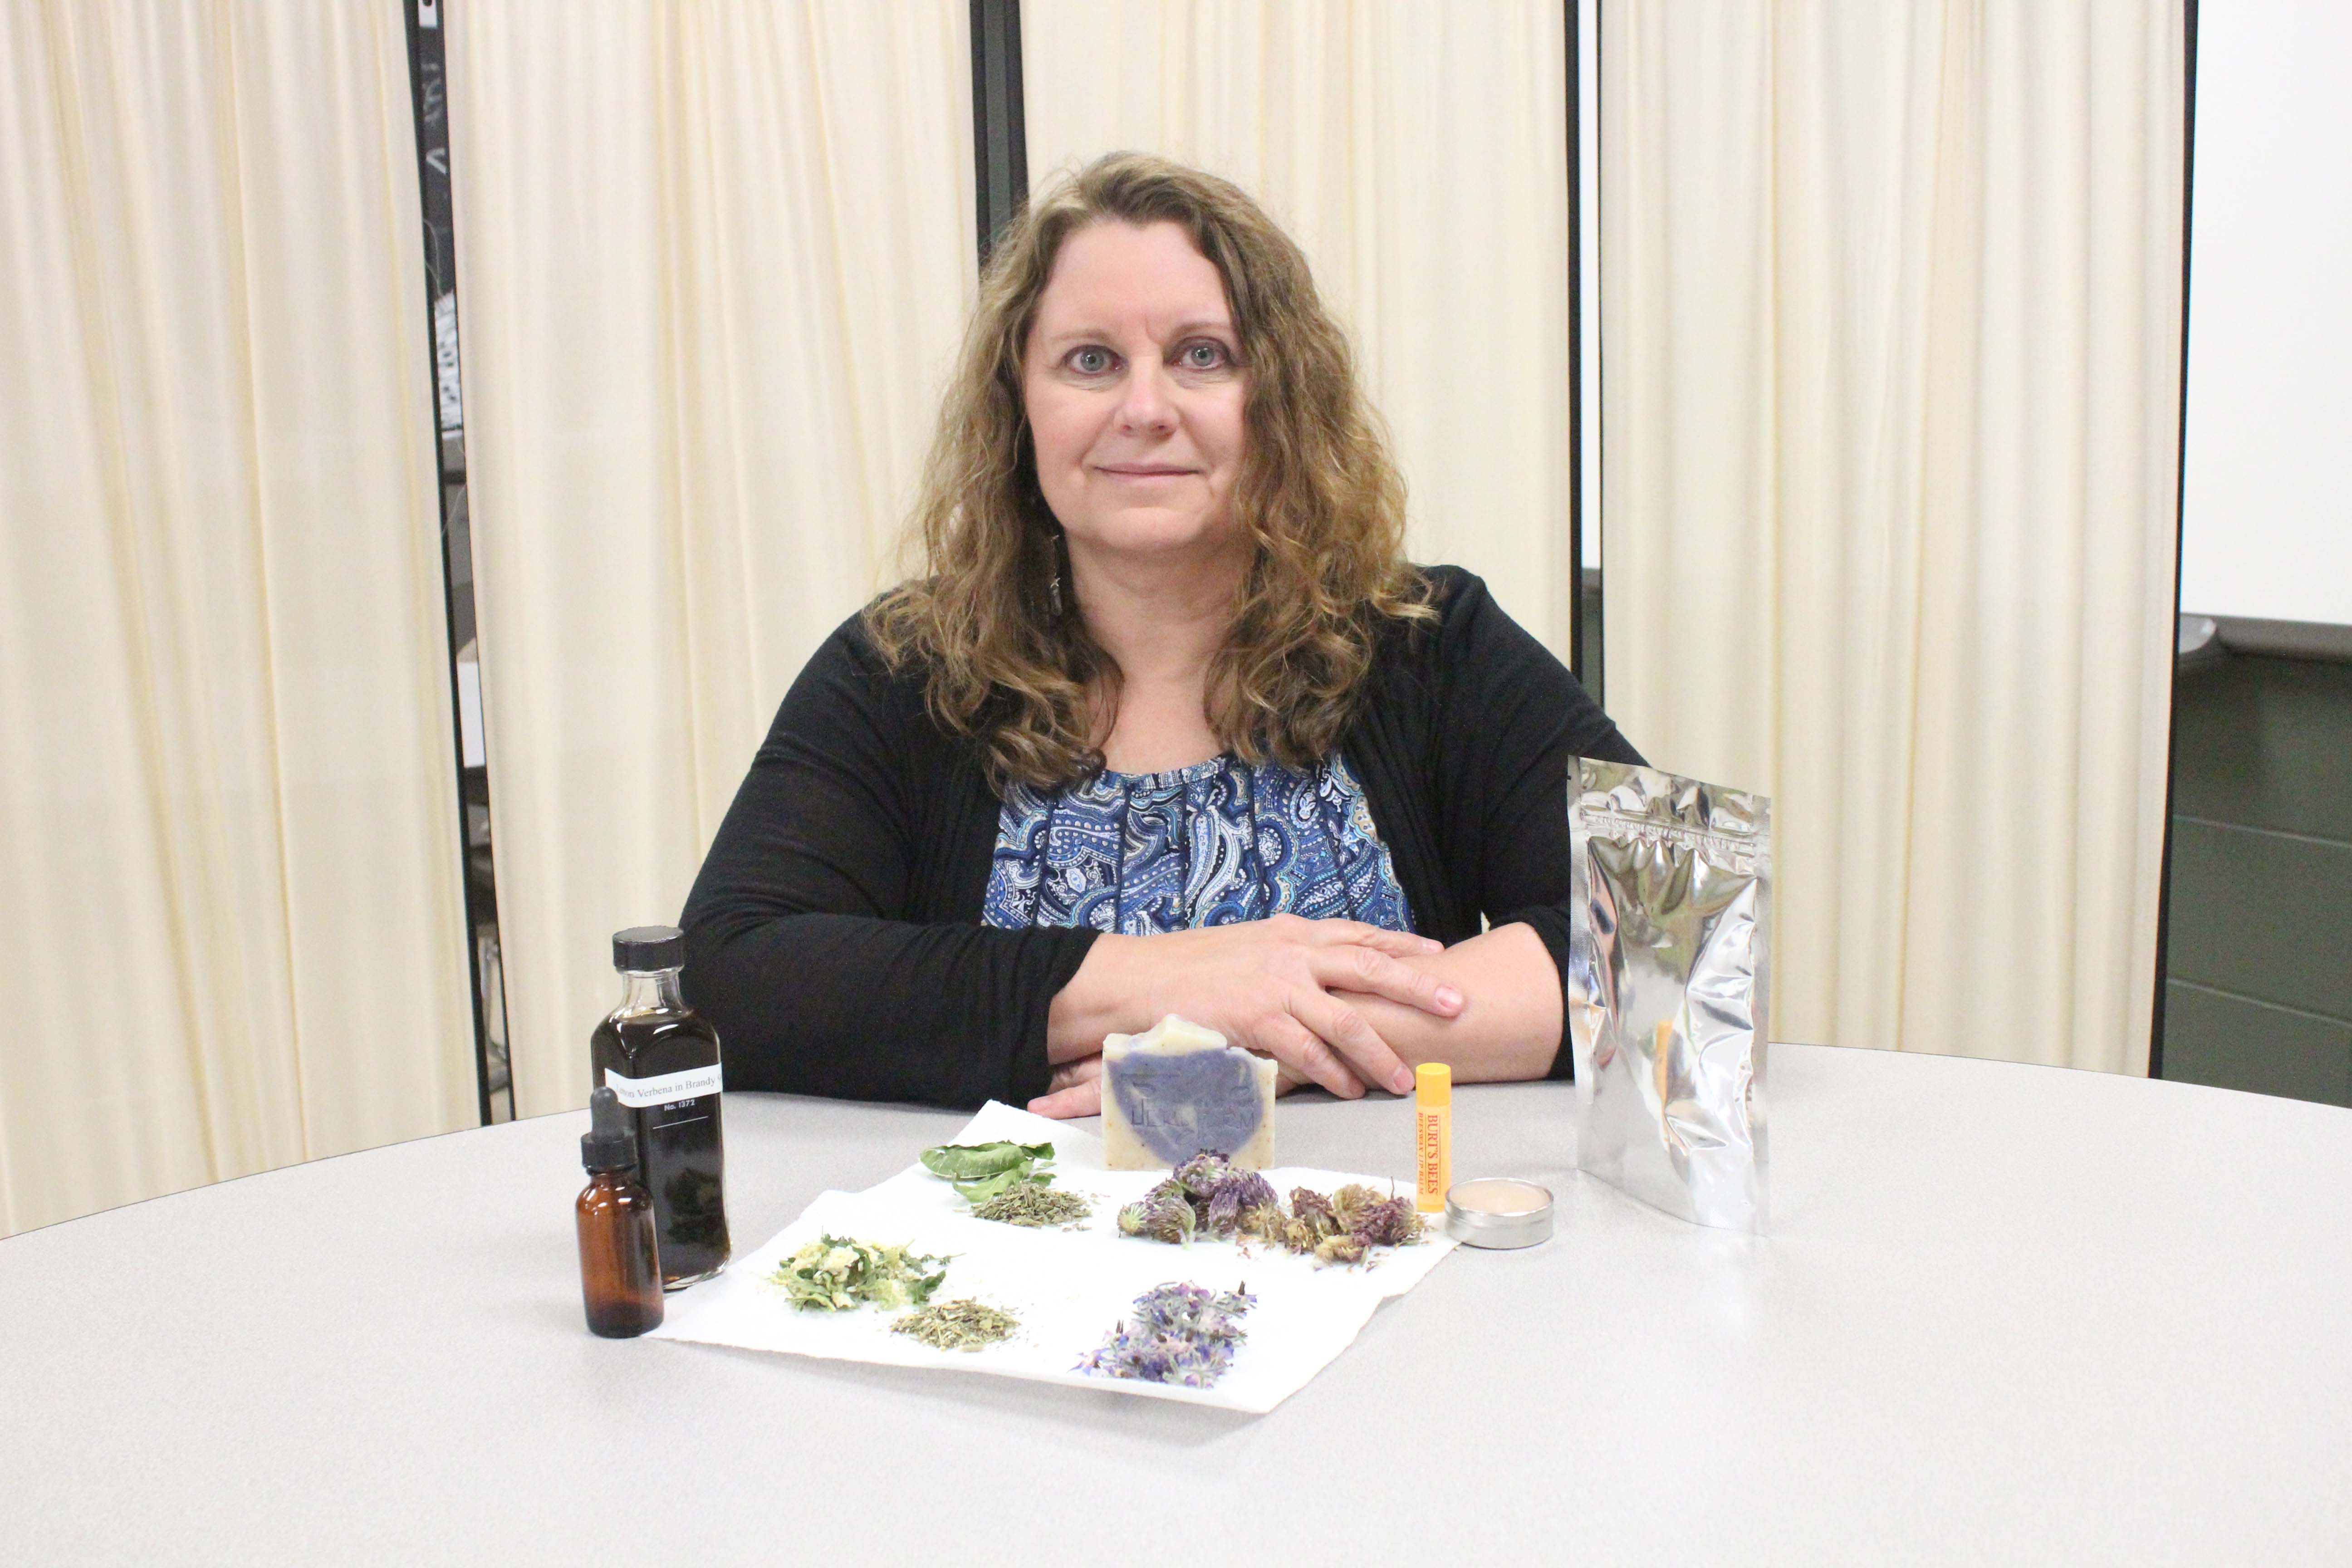 Local woman receives grant to study herbal products